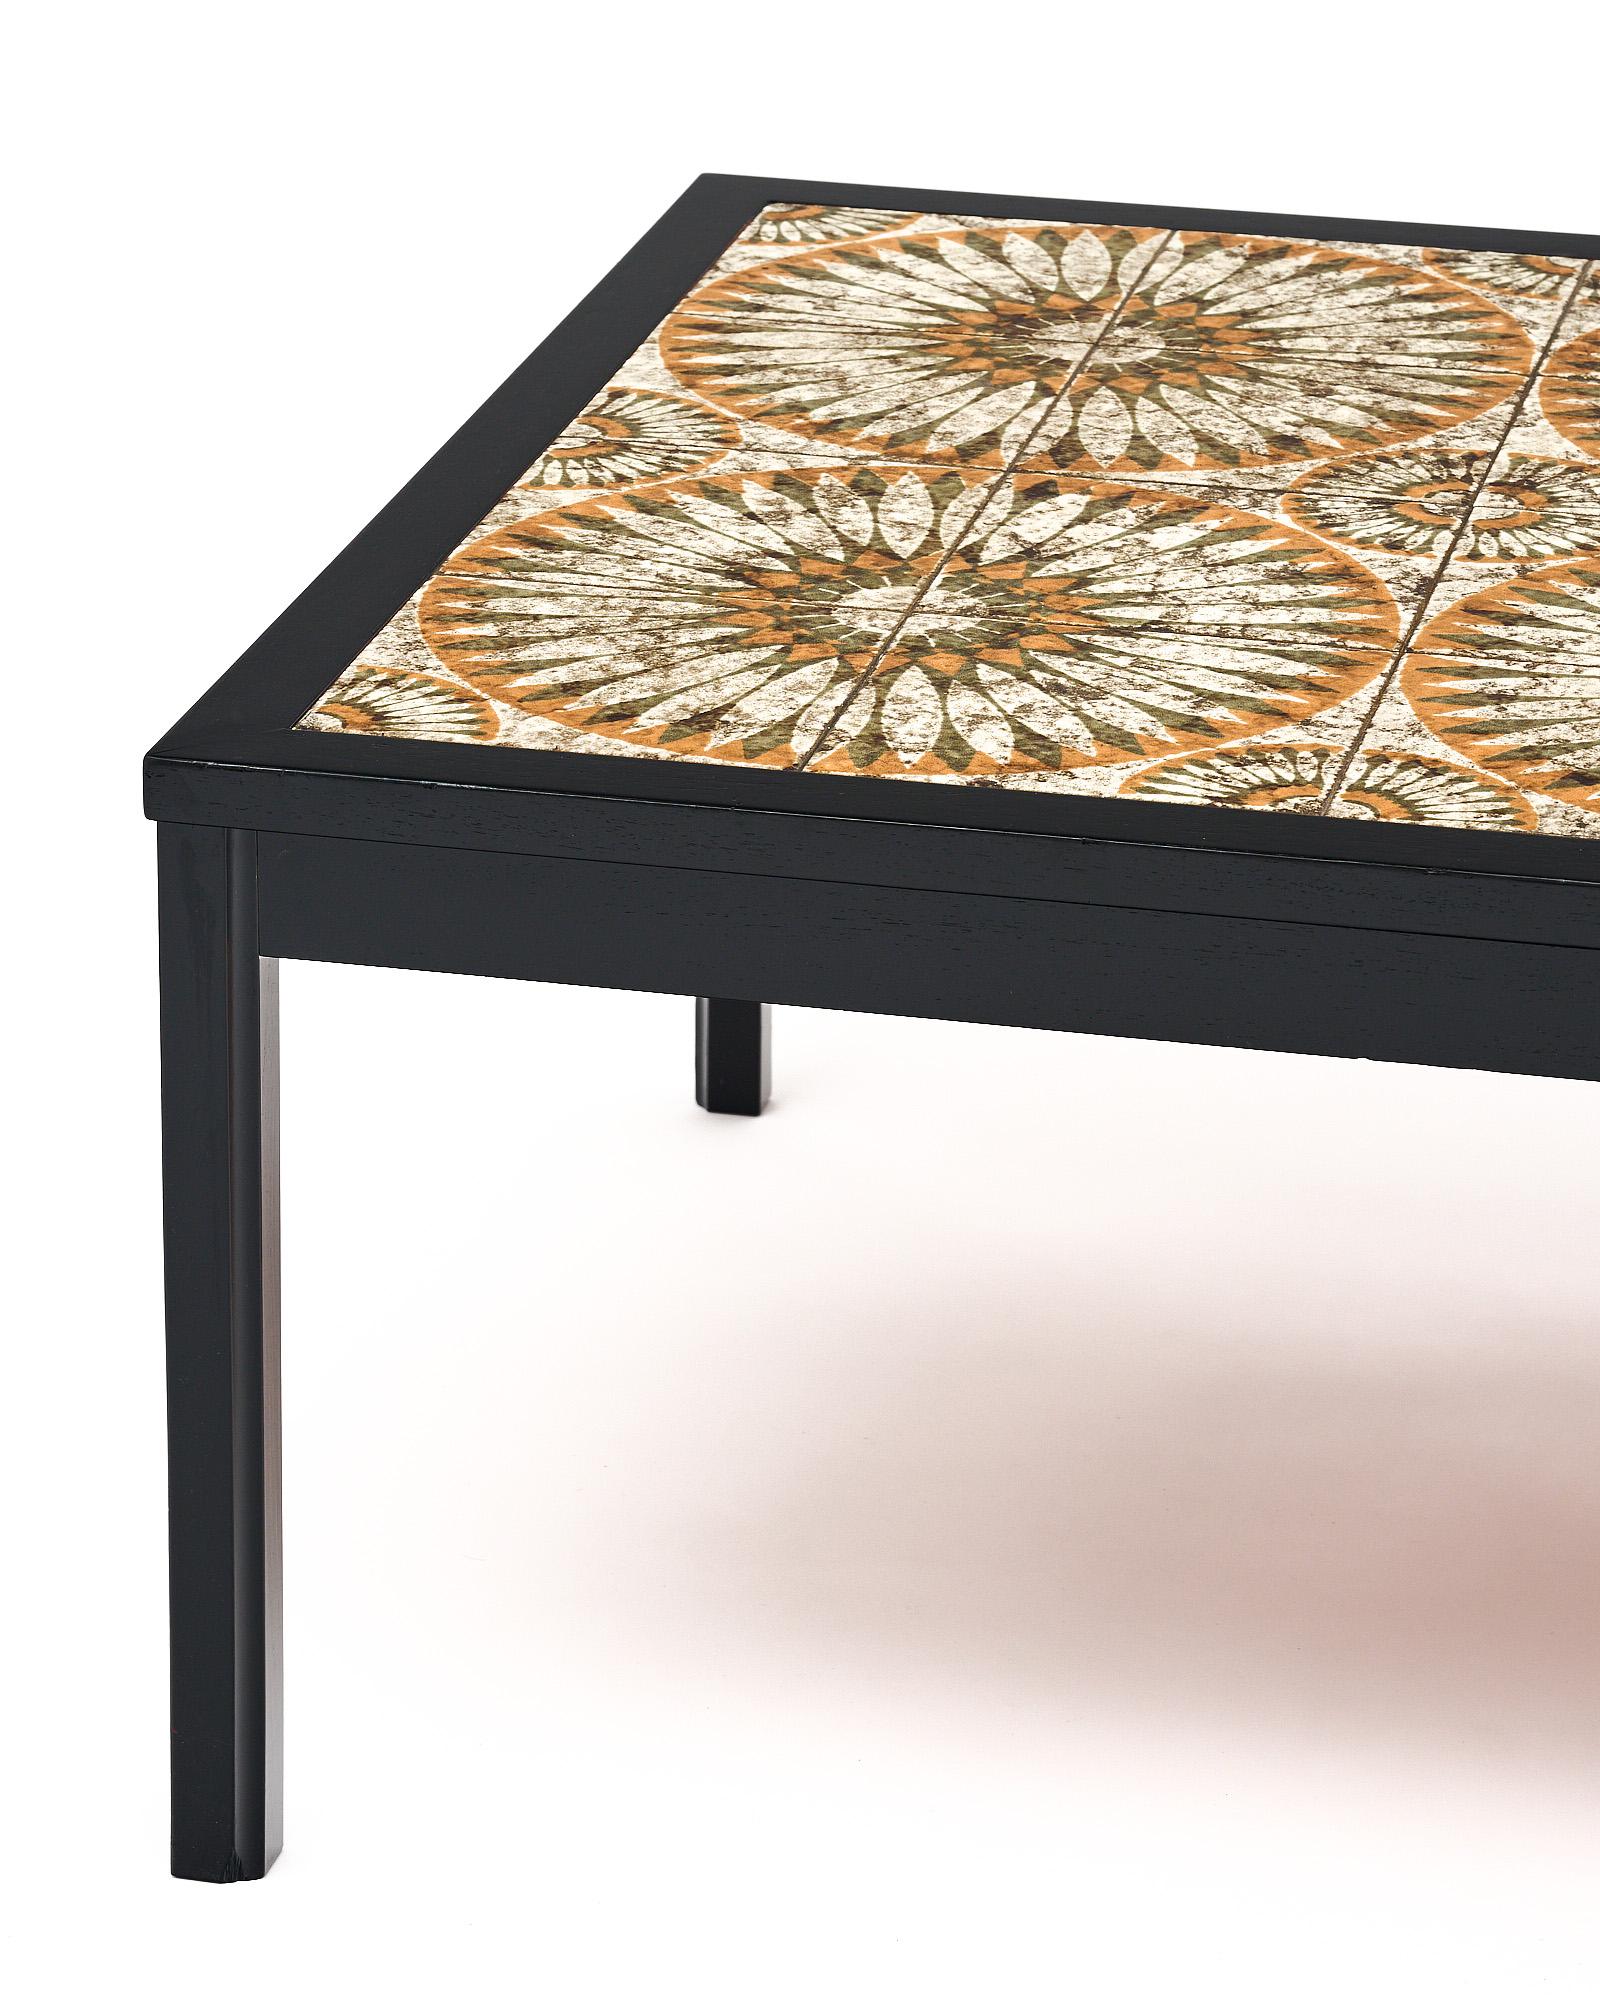 French Vintage Tiled Coffee Table from Vallauris For Sale